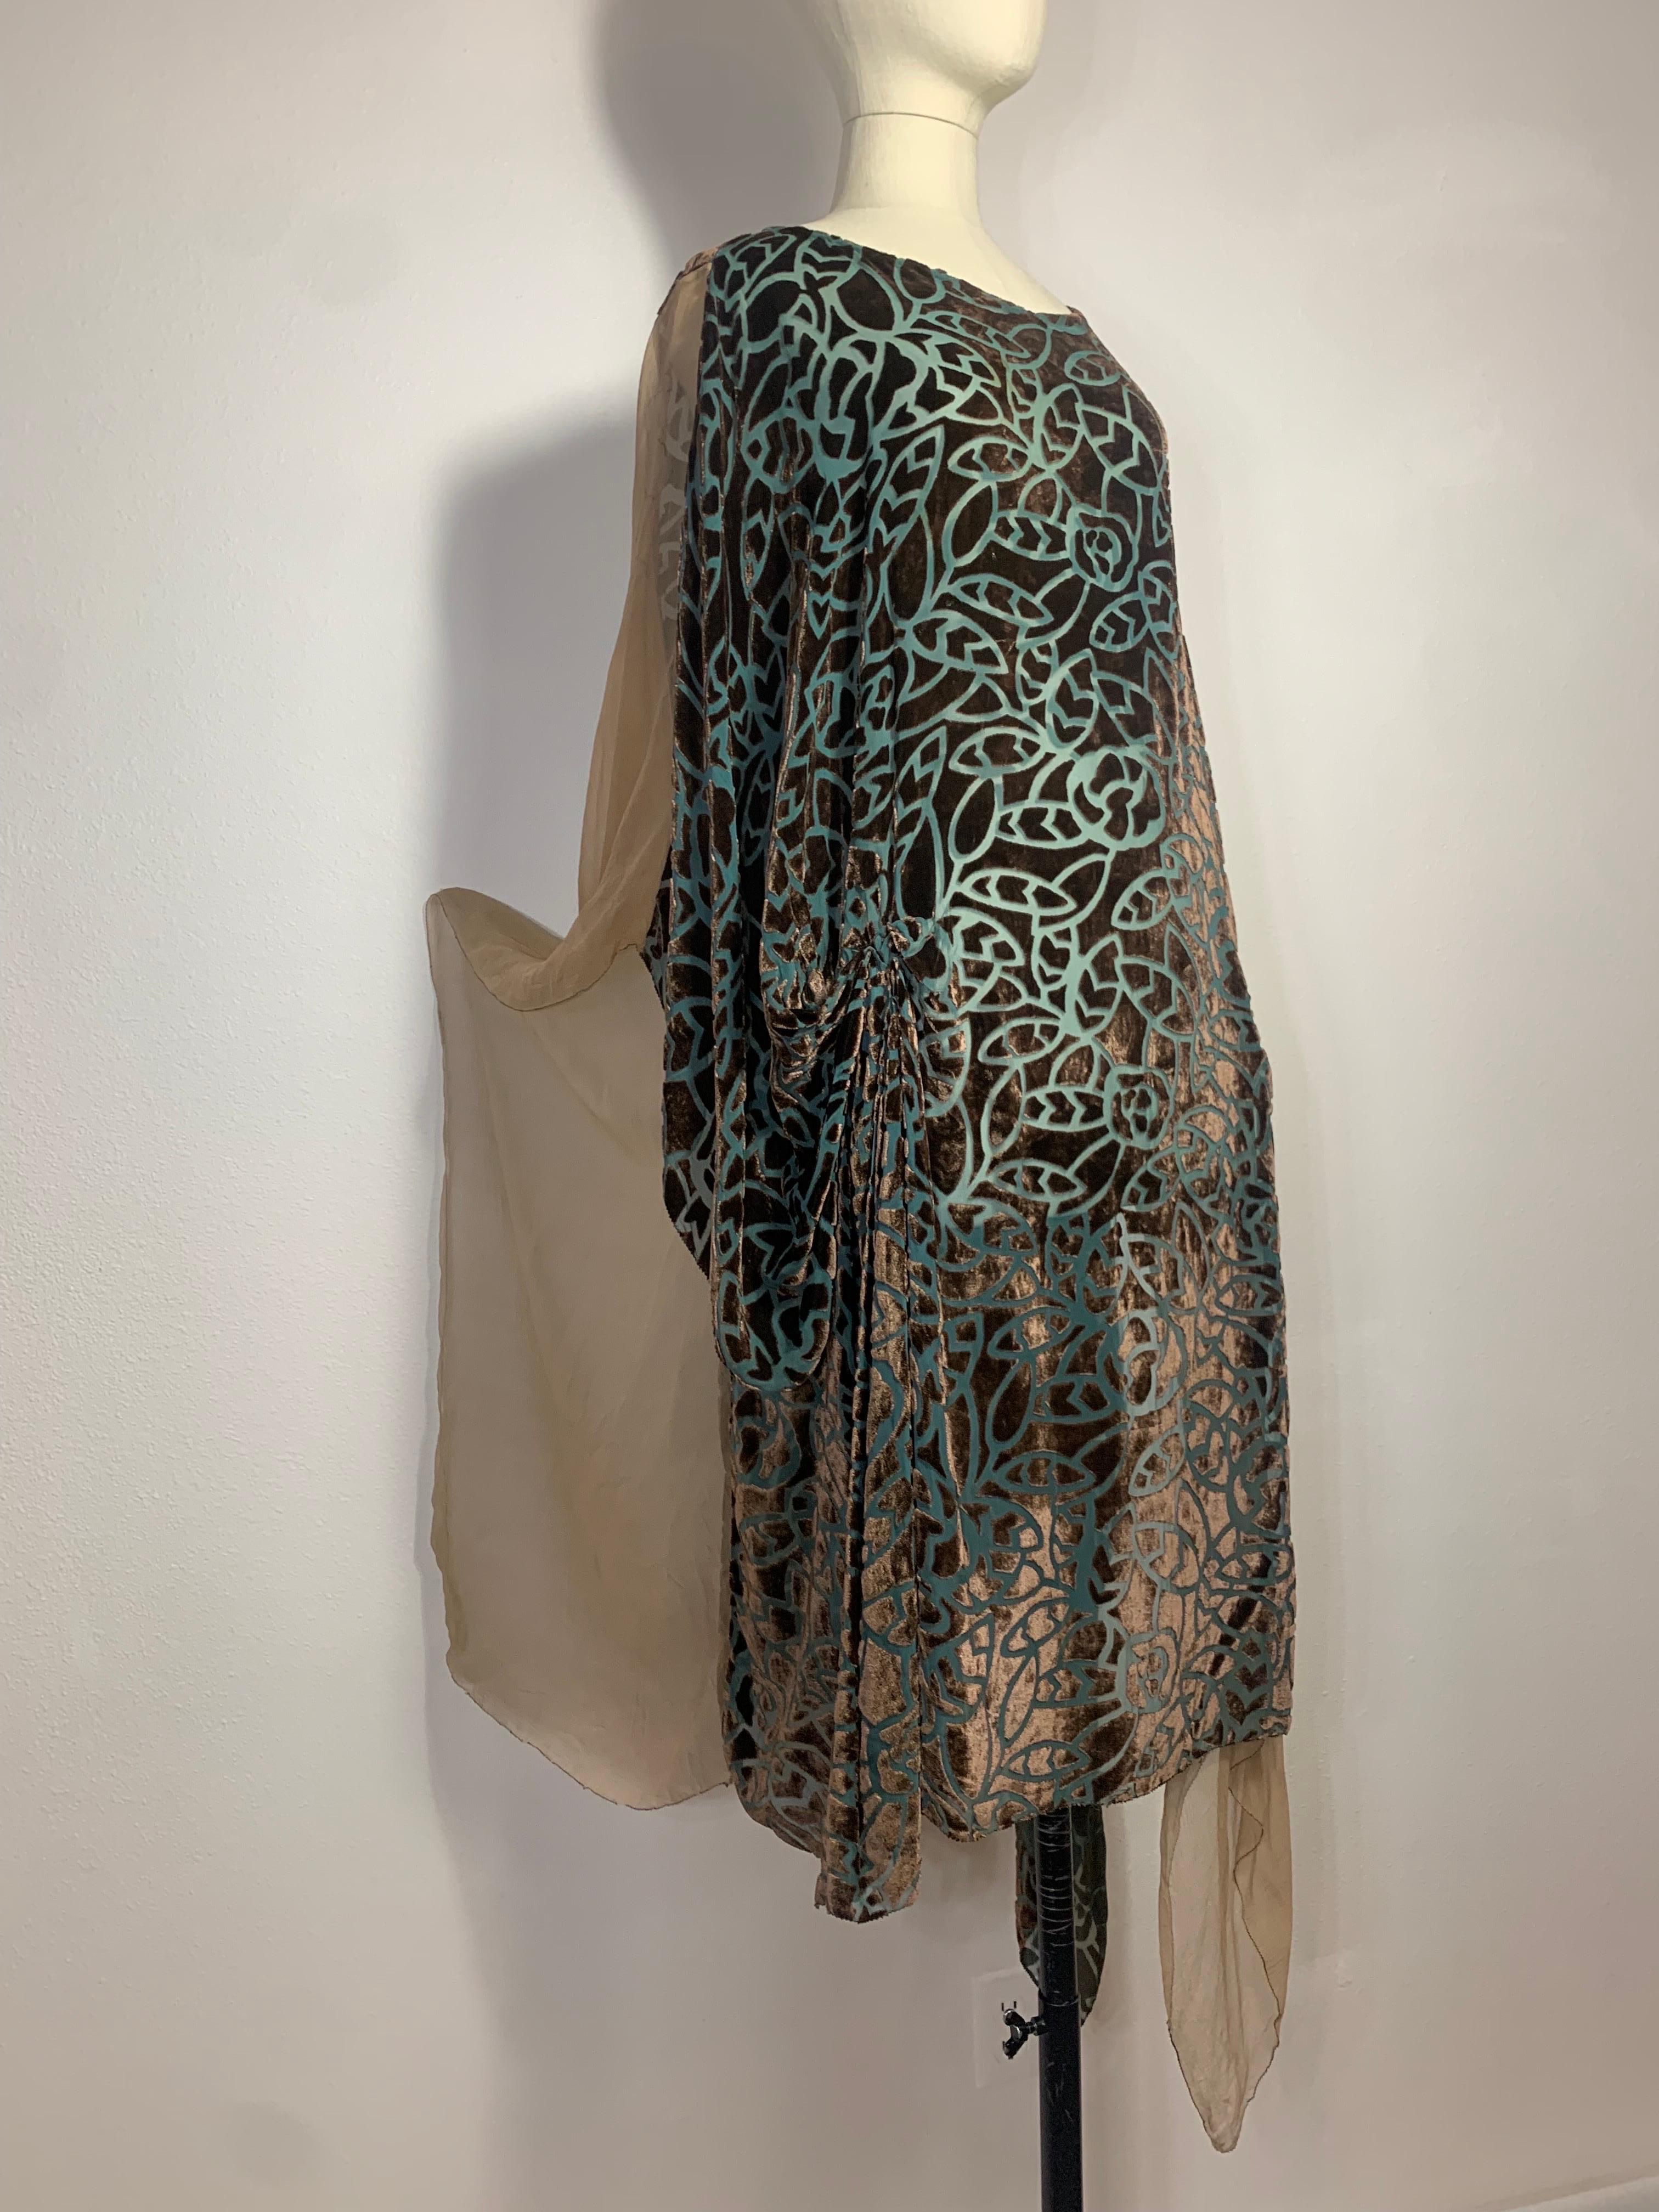 1920s Patina Green & Taupe Devore Velvet Art Deco Tunic w Stylized Leaf Pattern For Sale 6